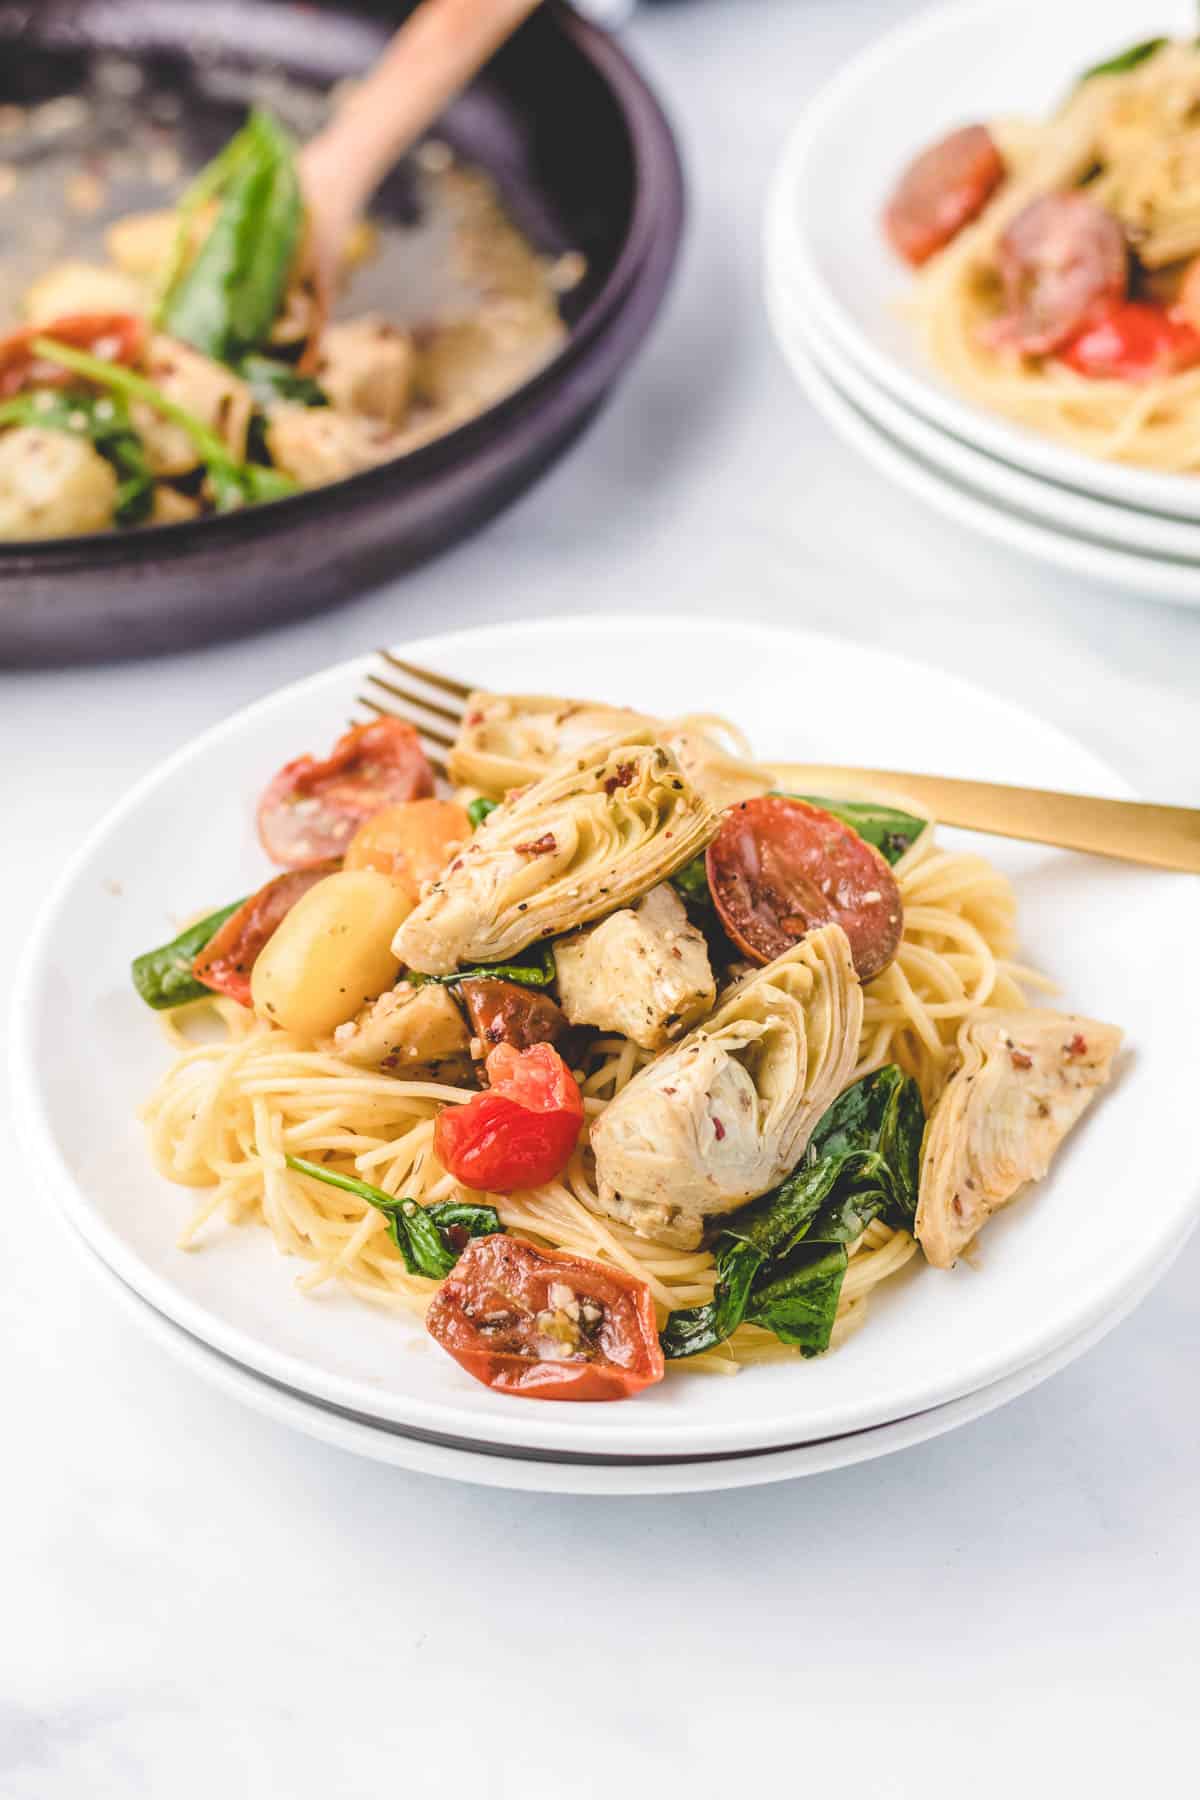 A bowl of spaghetti pasta topped with Italian artichokes, tomatoes, and spinach.